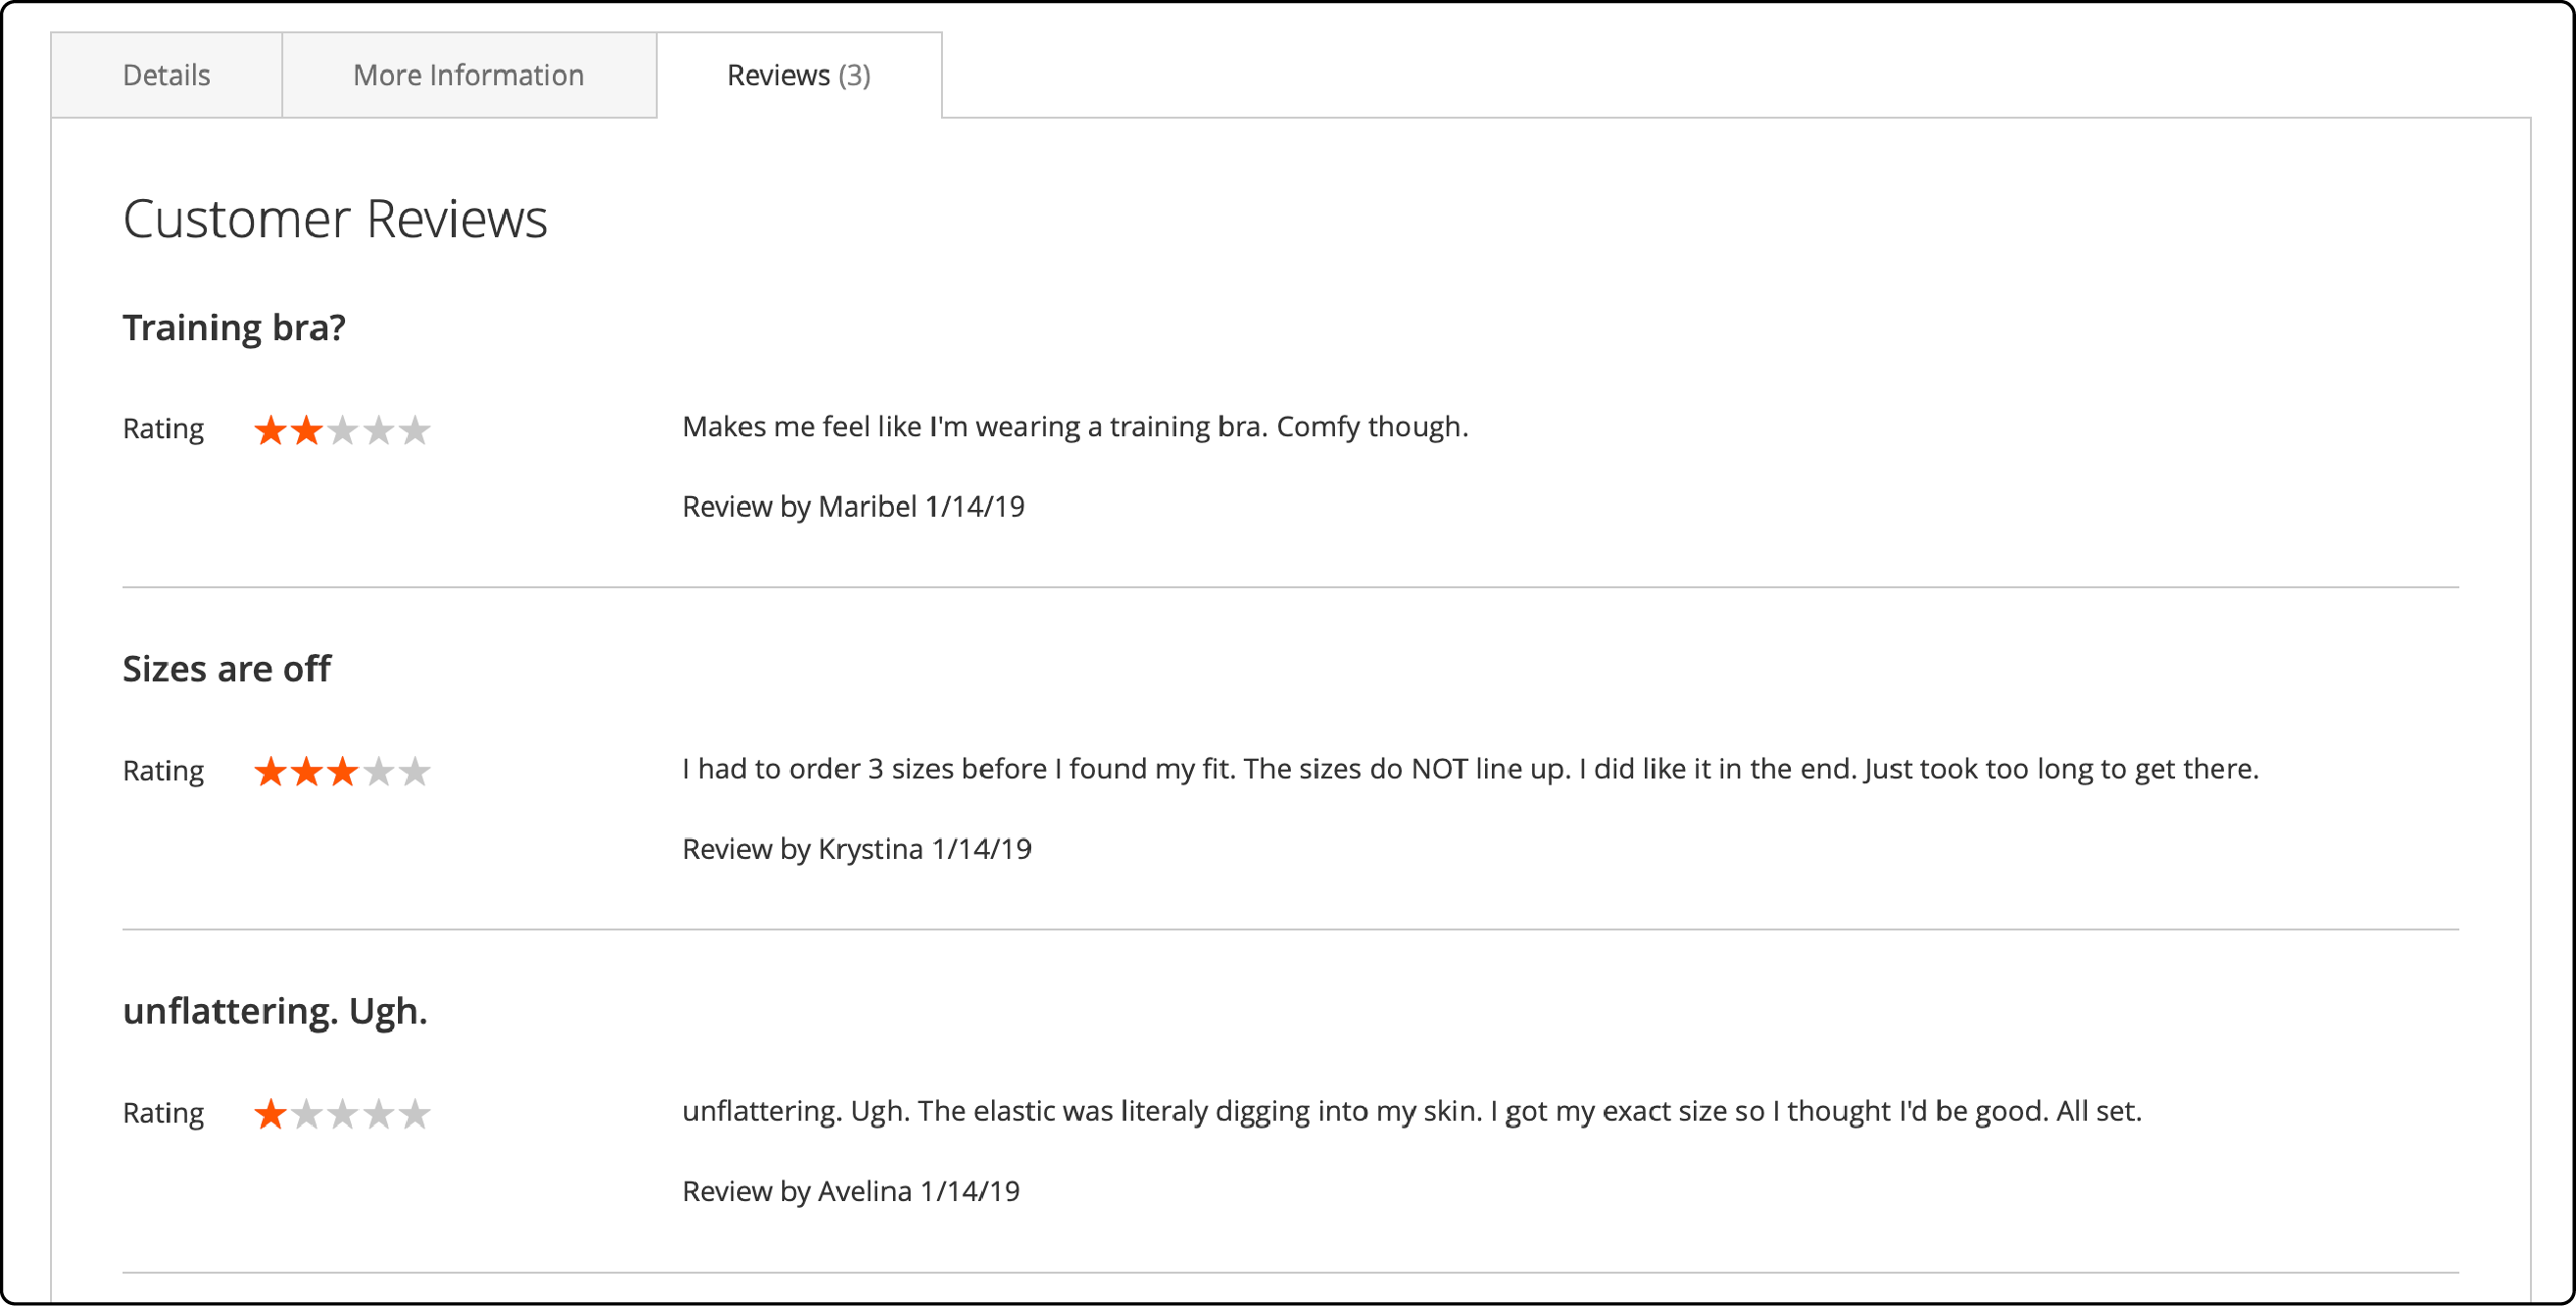 Example of a customer review displayed in Magento 2